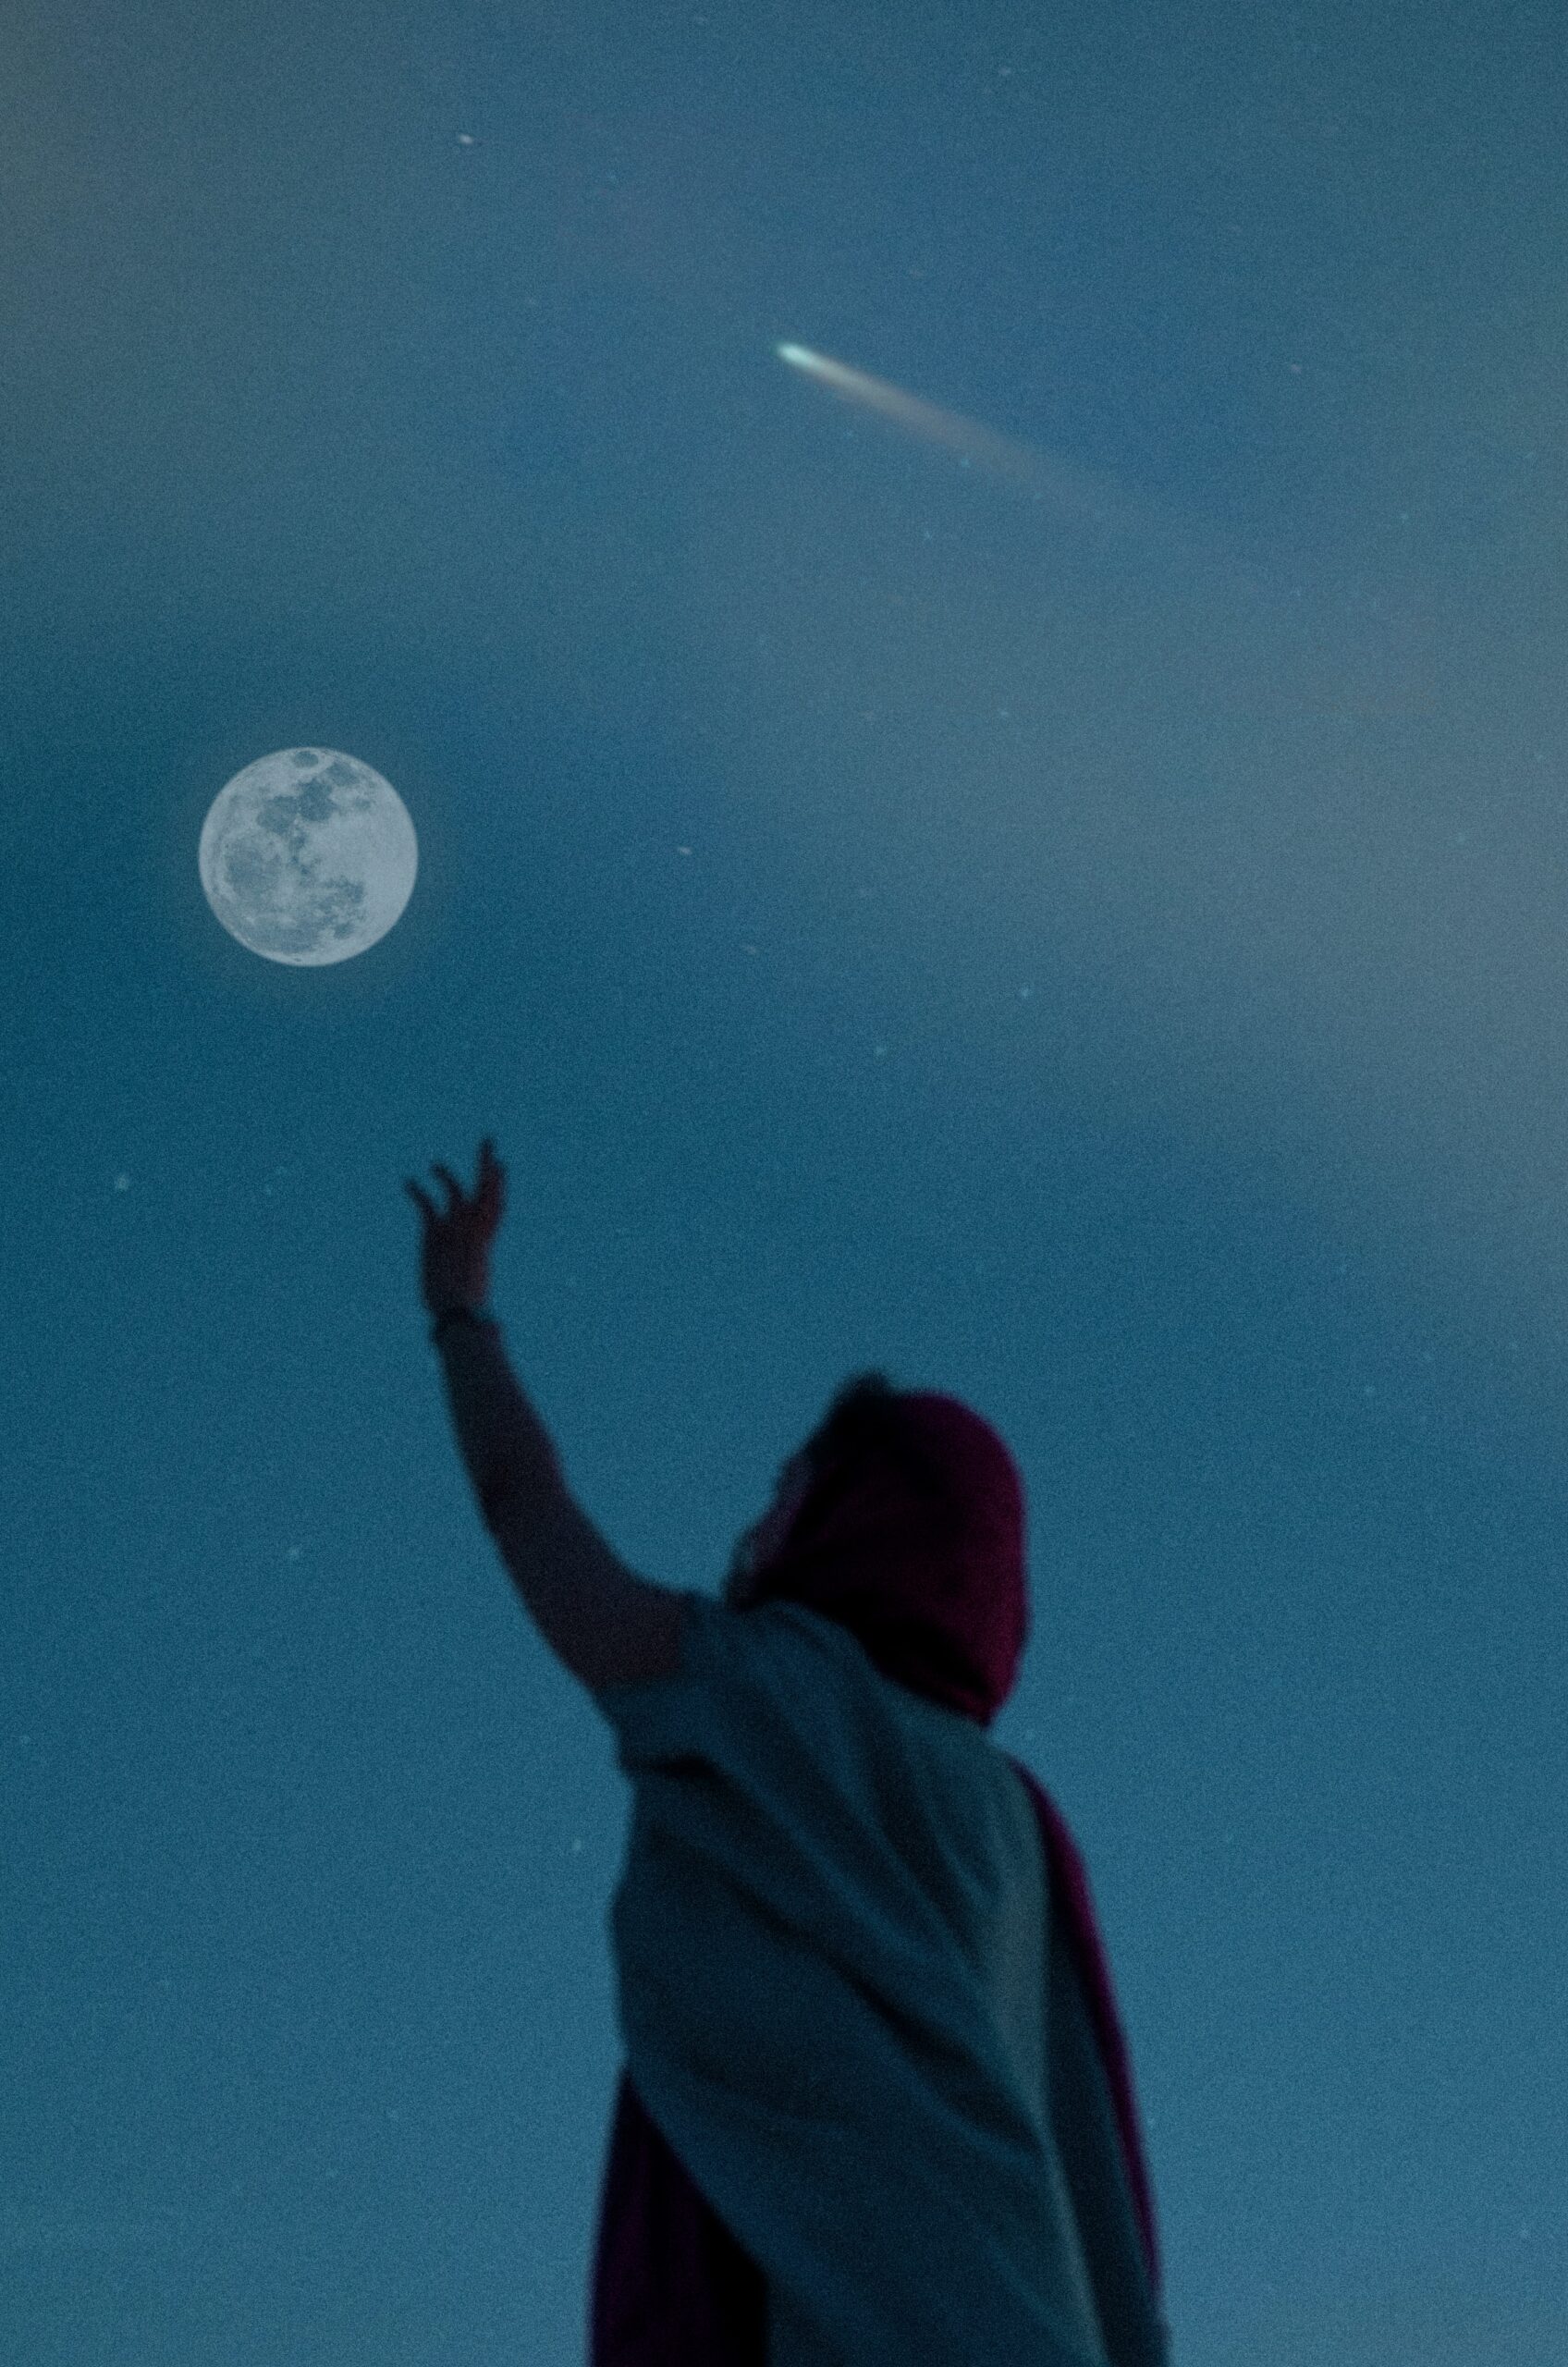 Photo of a person reaching for the full moon in the sky